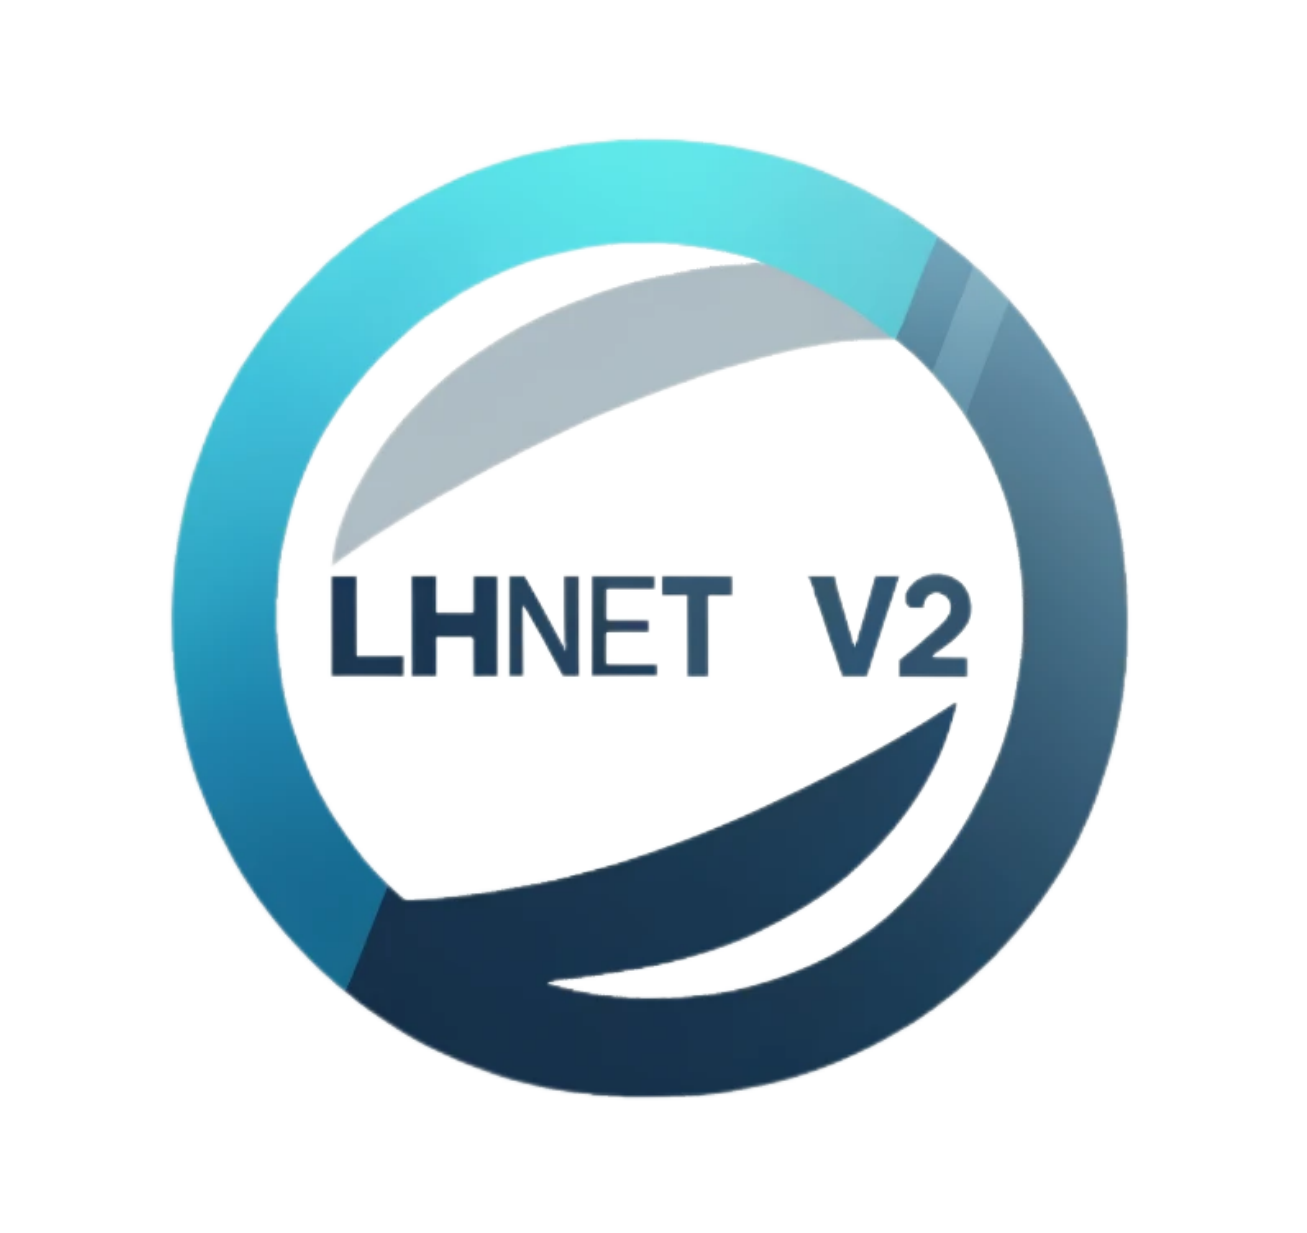 LHNetV2: A Balanced Low-cost Hybrid Network for Single Image Dehazing